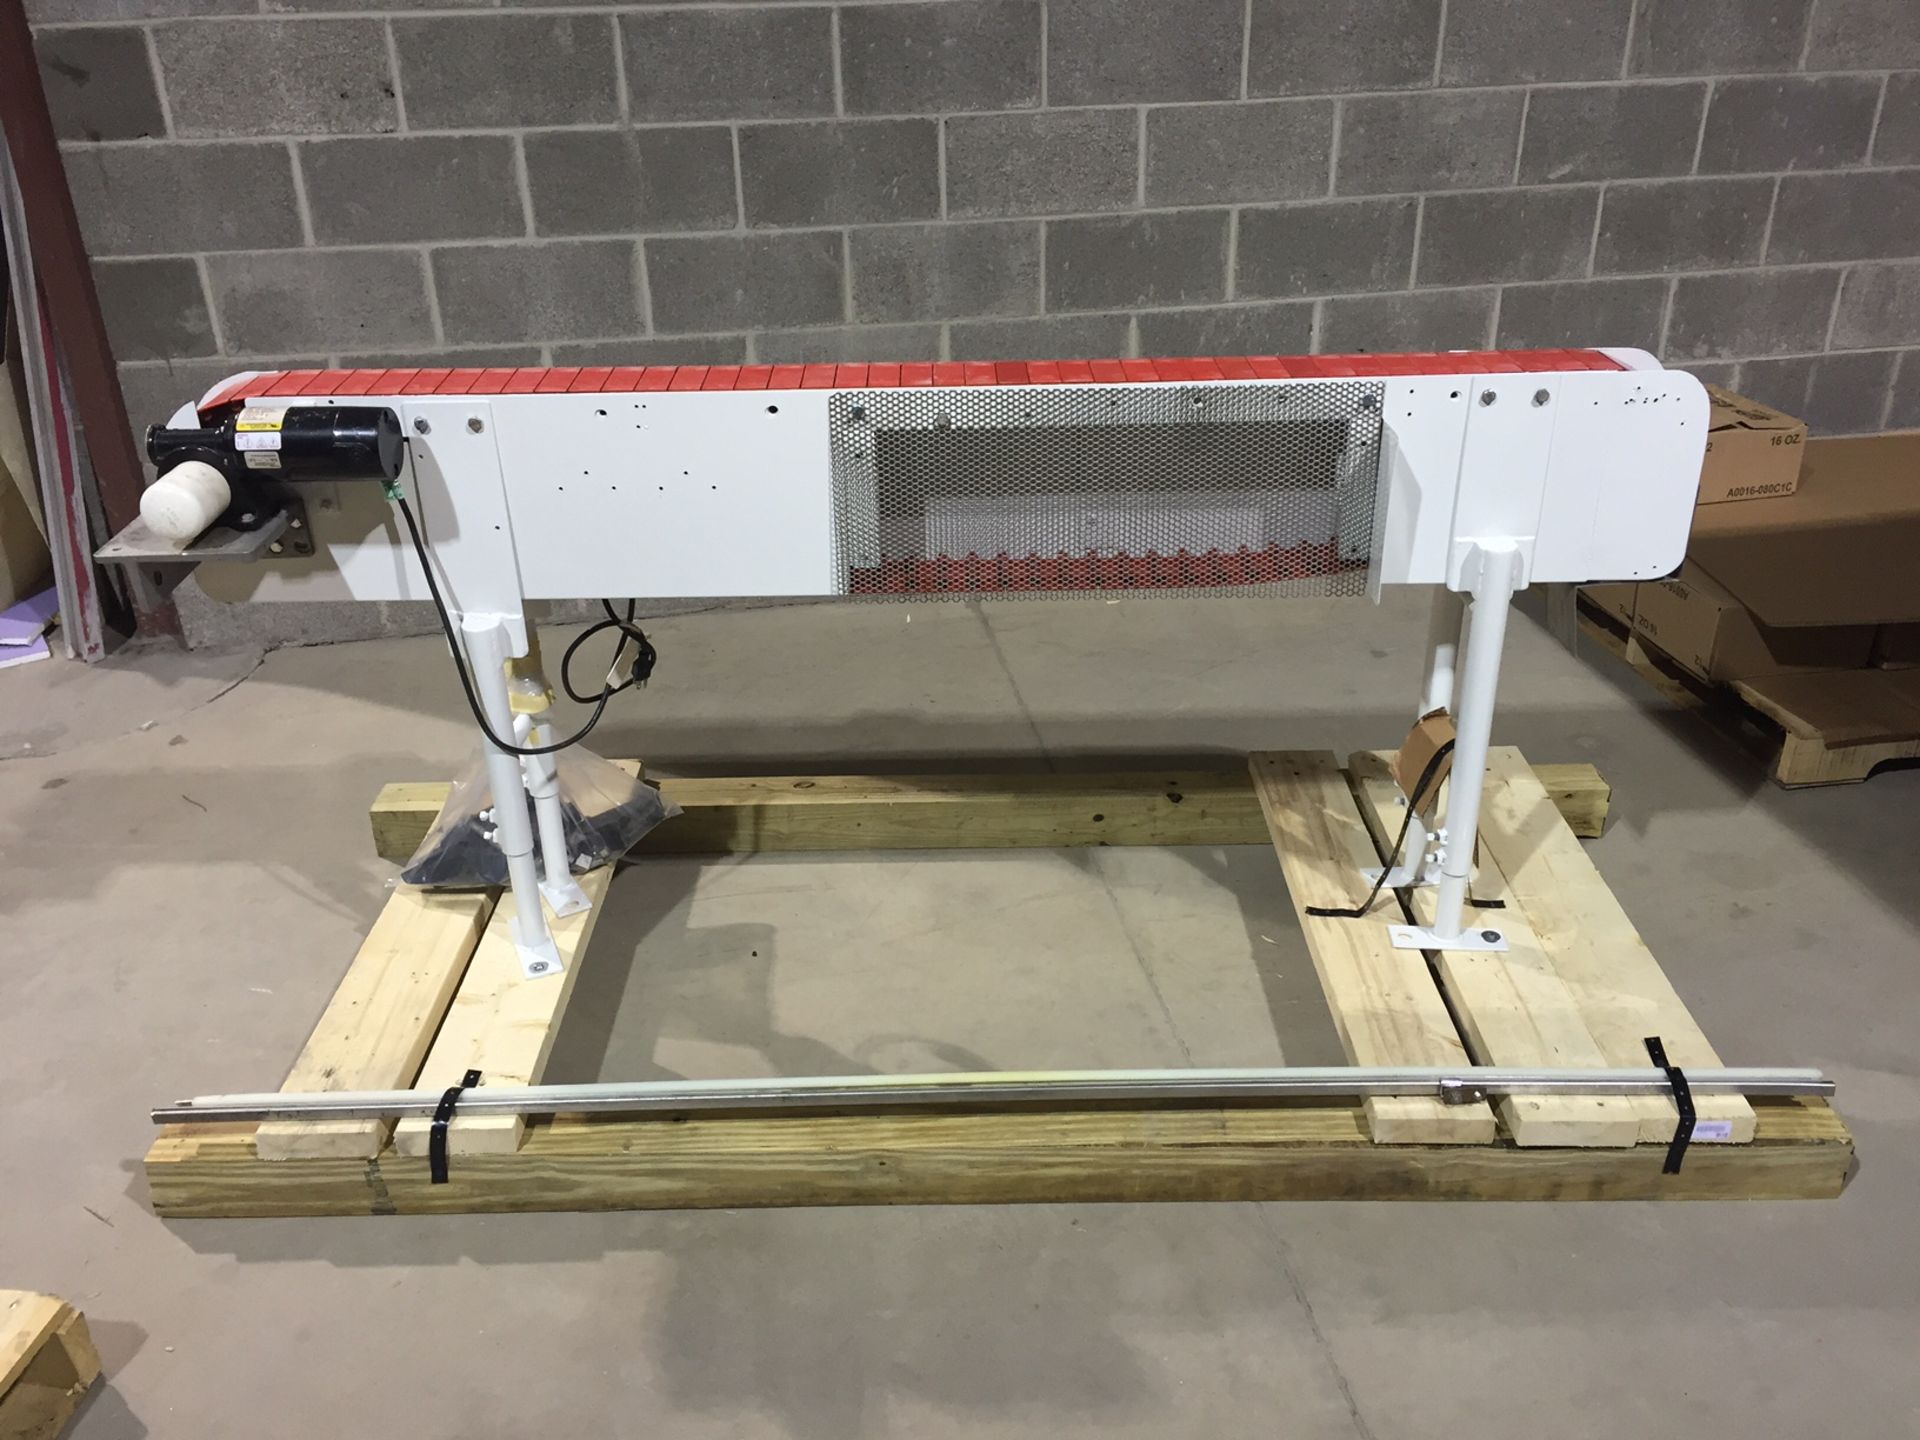 6ft 110 V Conveyor. 4.5" Wide Track w/ Rails and Guides. Adjustable Height and Speed. - Image 2 of 2